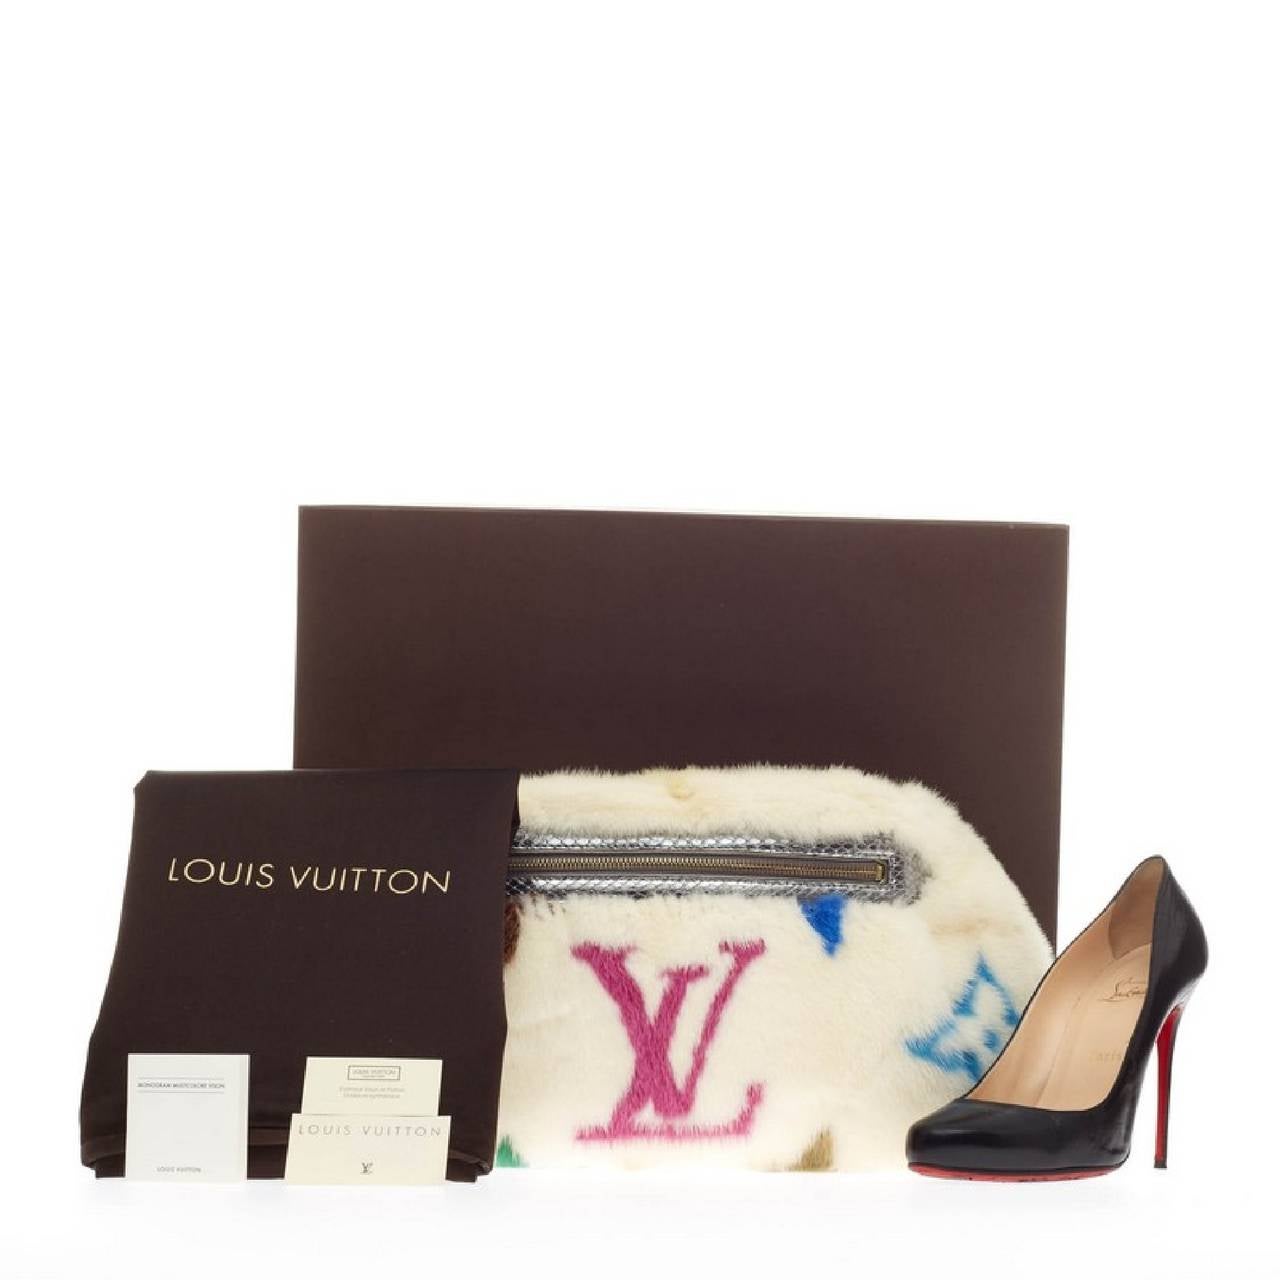 This authentic hard-to-find Louis Vuitton Bum Bag Limited Edition Multicolor Monogram Mink designed in the brand's Fall/Winter 2006 Les Extraordinaires Collection exudes avant-garde style perfect for Louis Vuitton lovers. Crafted in stylish